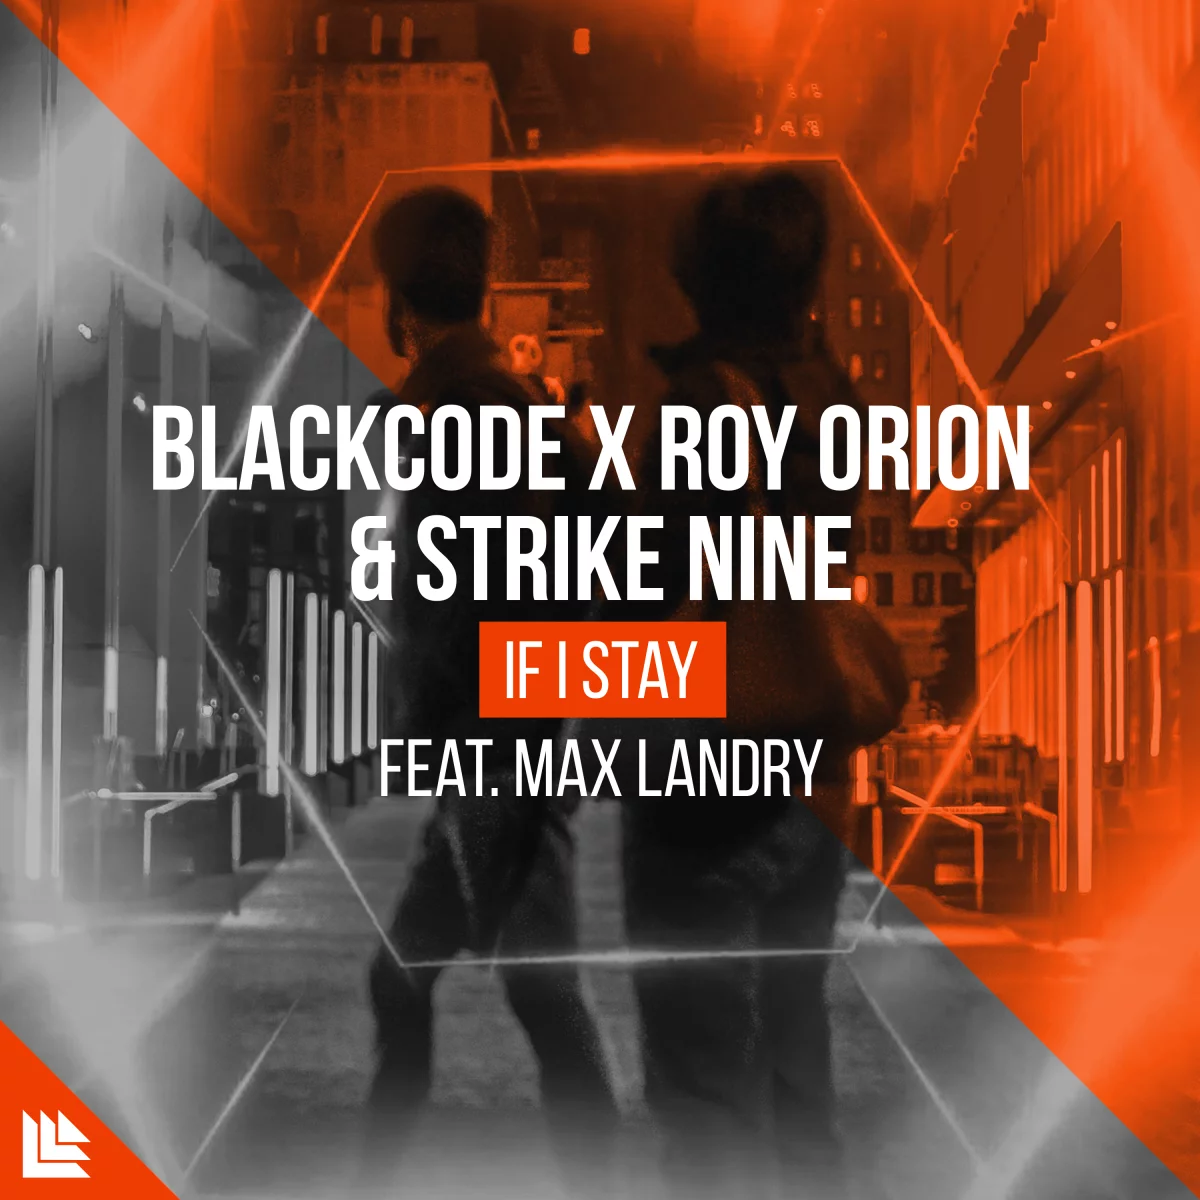 If I Stay - Blackcode⁠ X Roy Orion⁠ & Strike Nine⁠ feat. Max Landry Official⁠